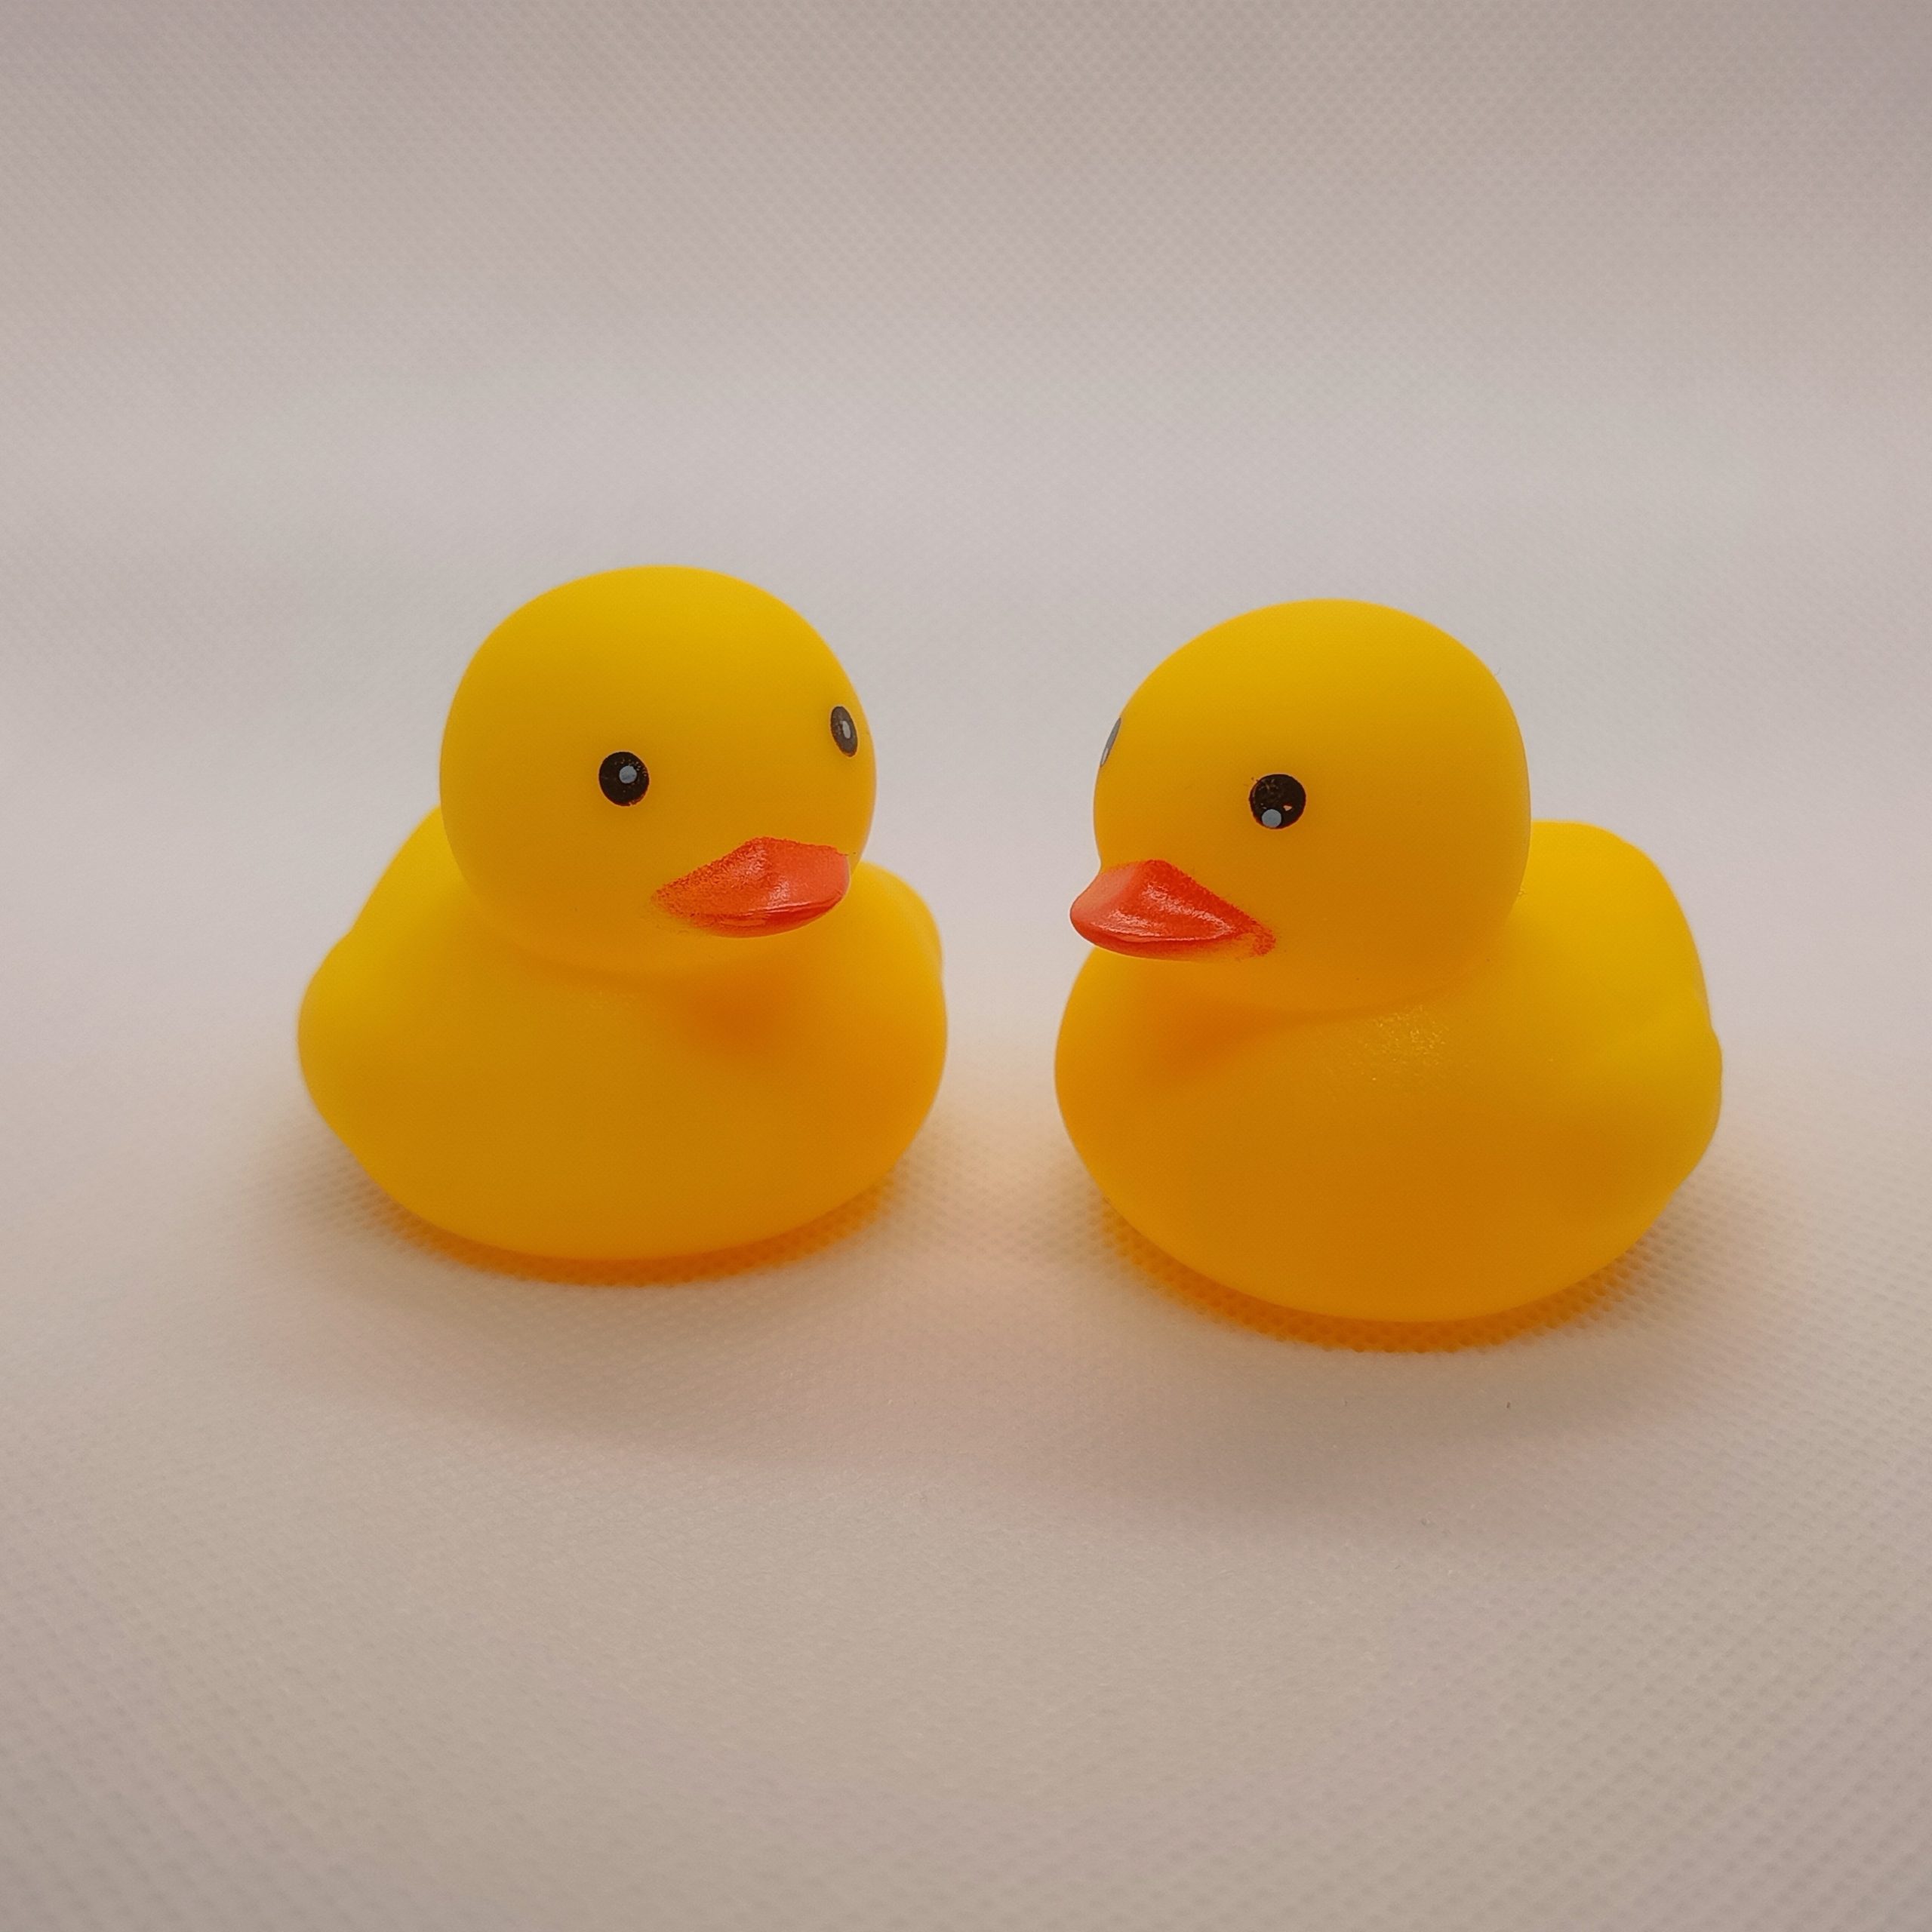 Two,Rubber,Duck,In,The,Middle,Of,A,White,Background